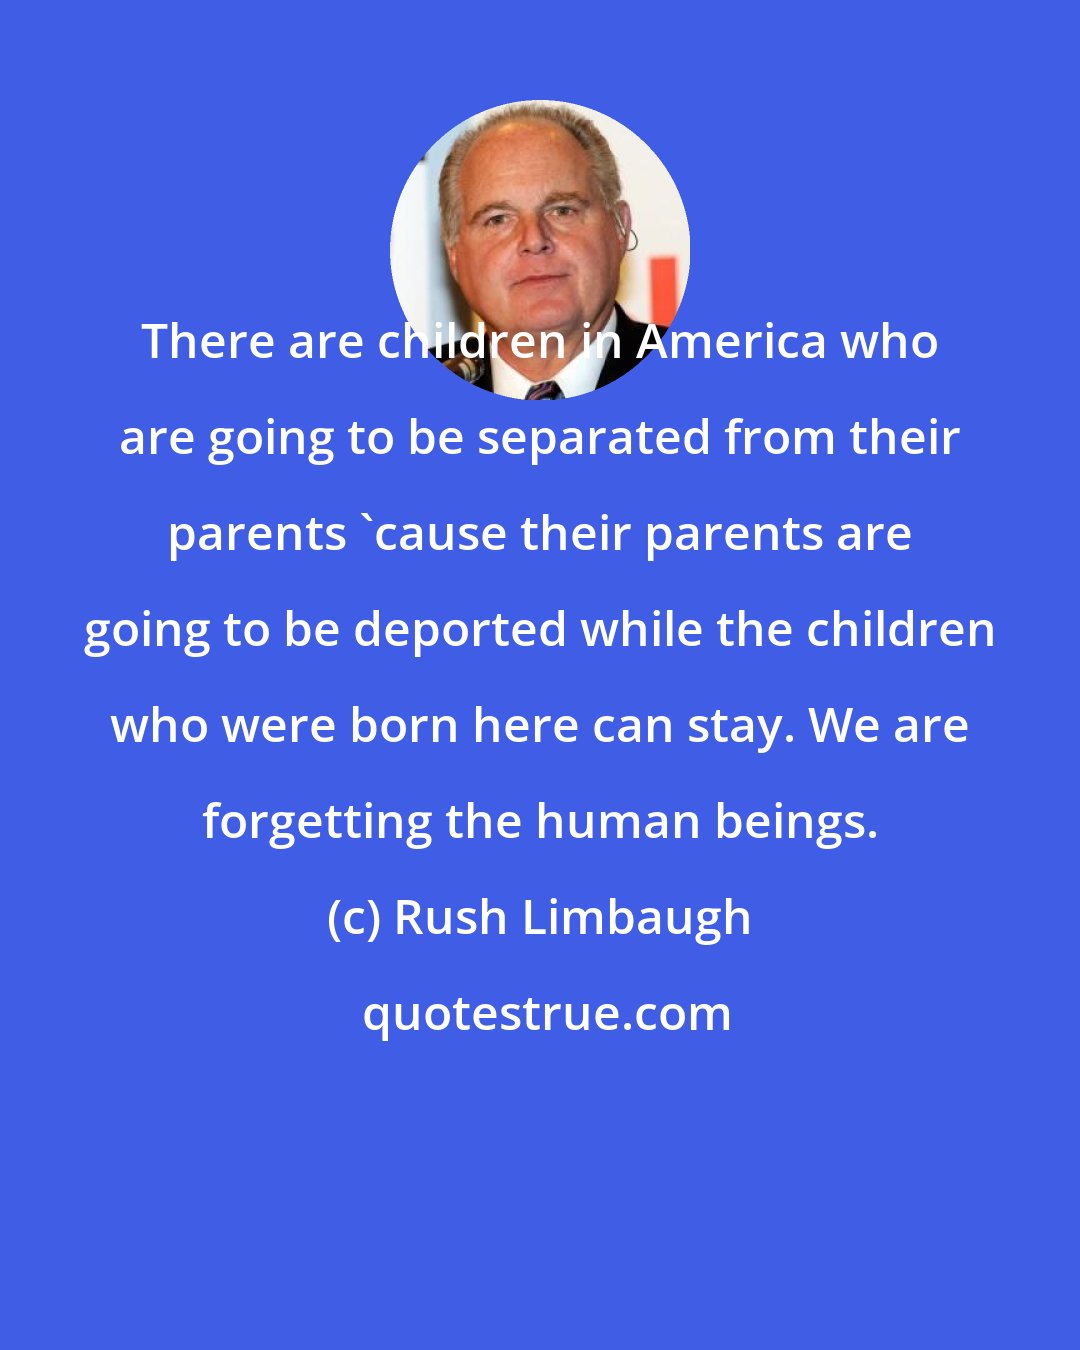 Rush Limbaugh: There are children in America who are going to be separated from their parents 'cause their parents are going to be deported while the children who were born here can stay. We are forgetting the human beings.